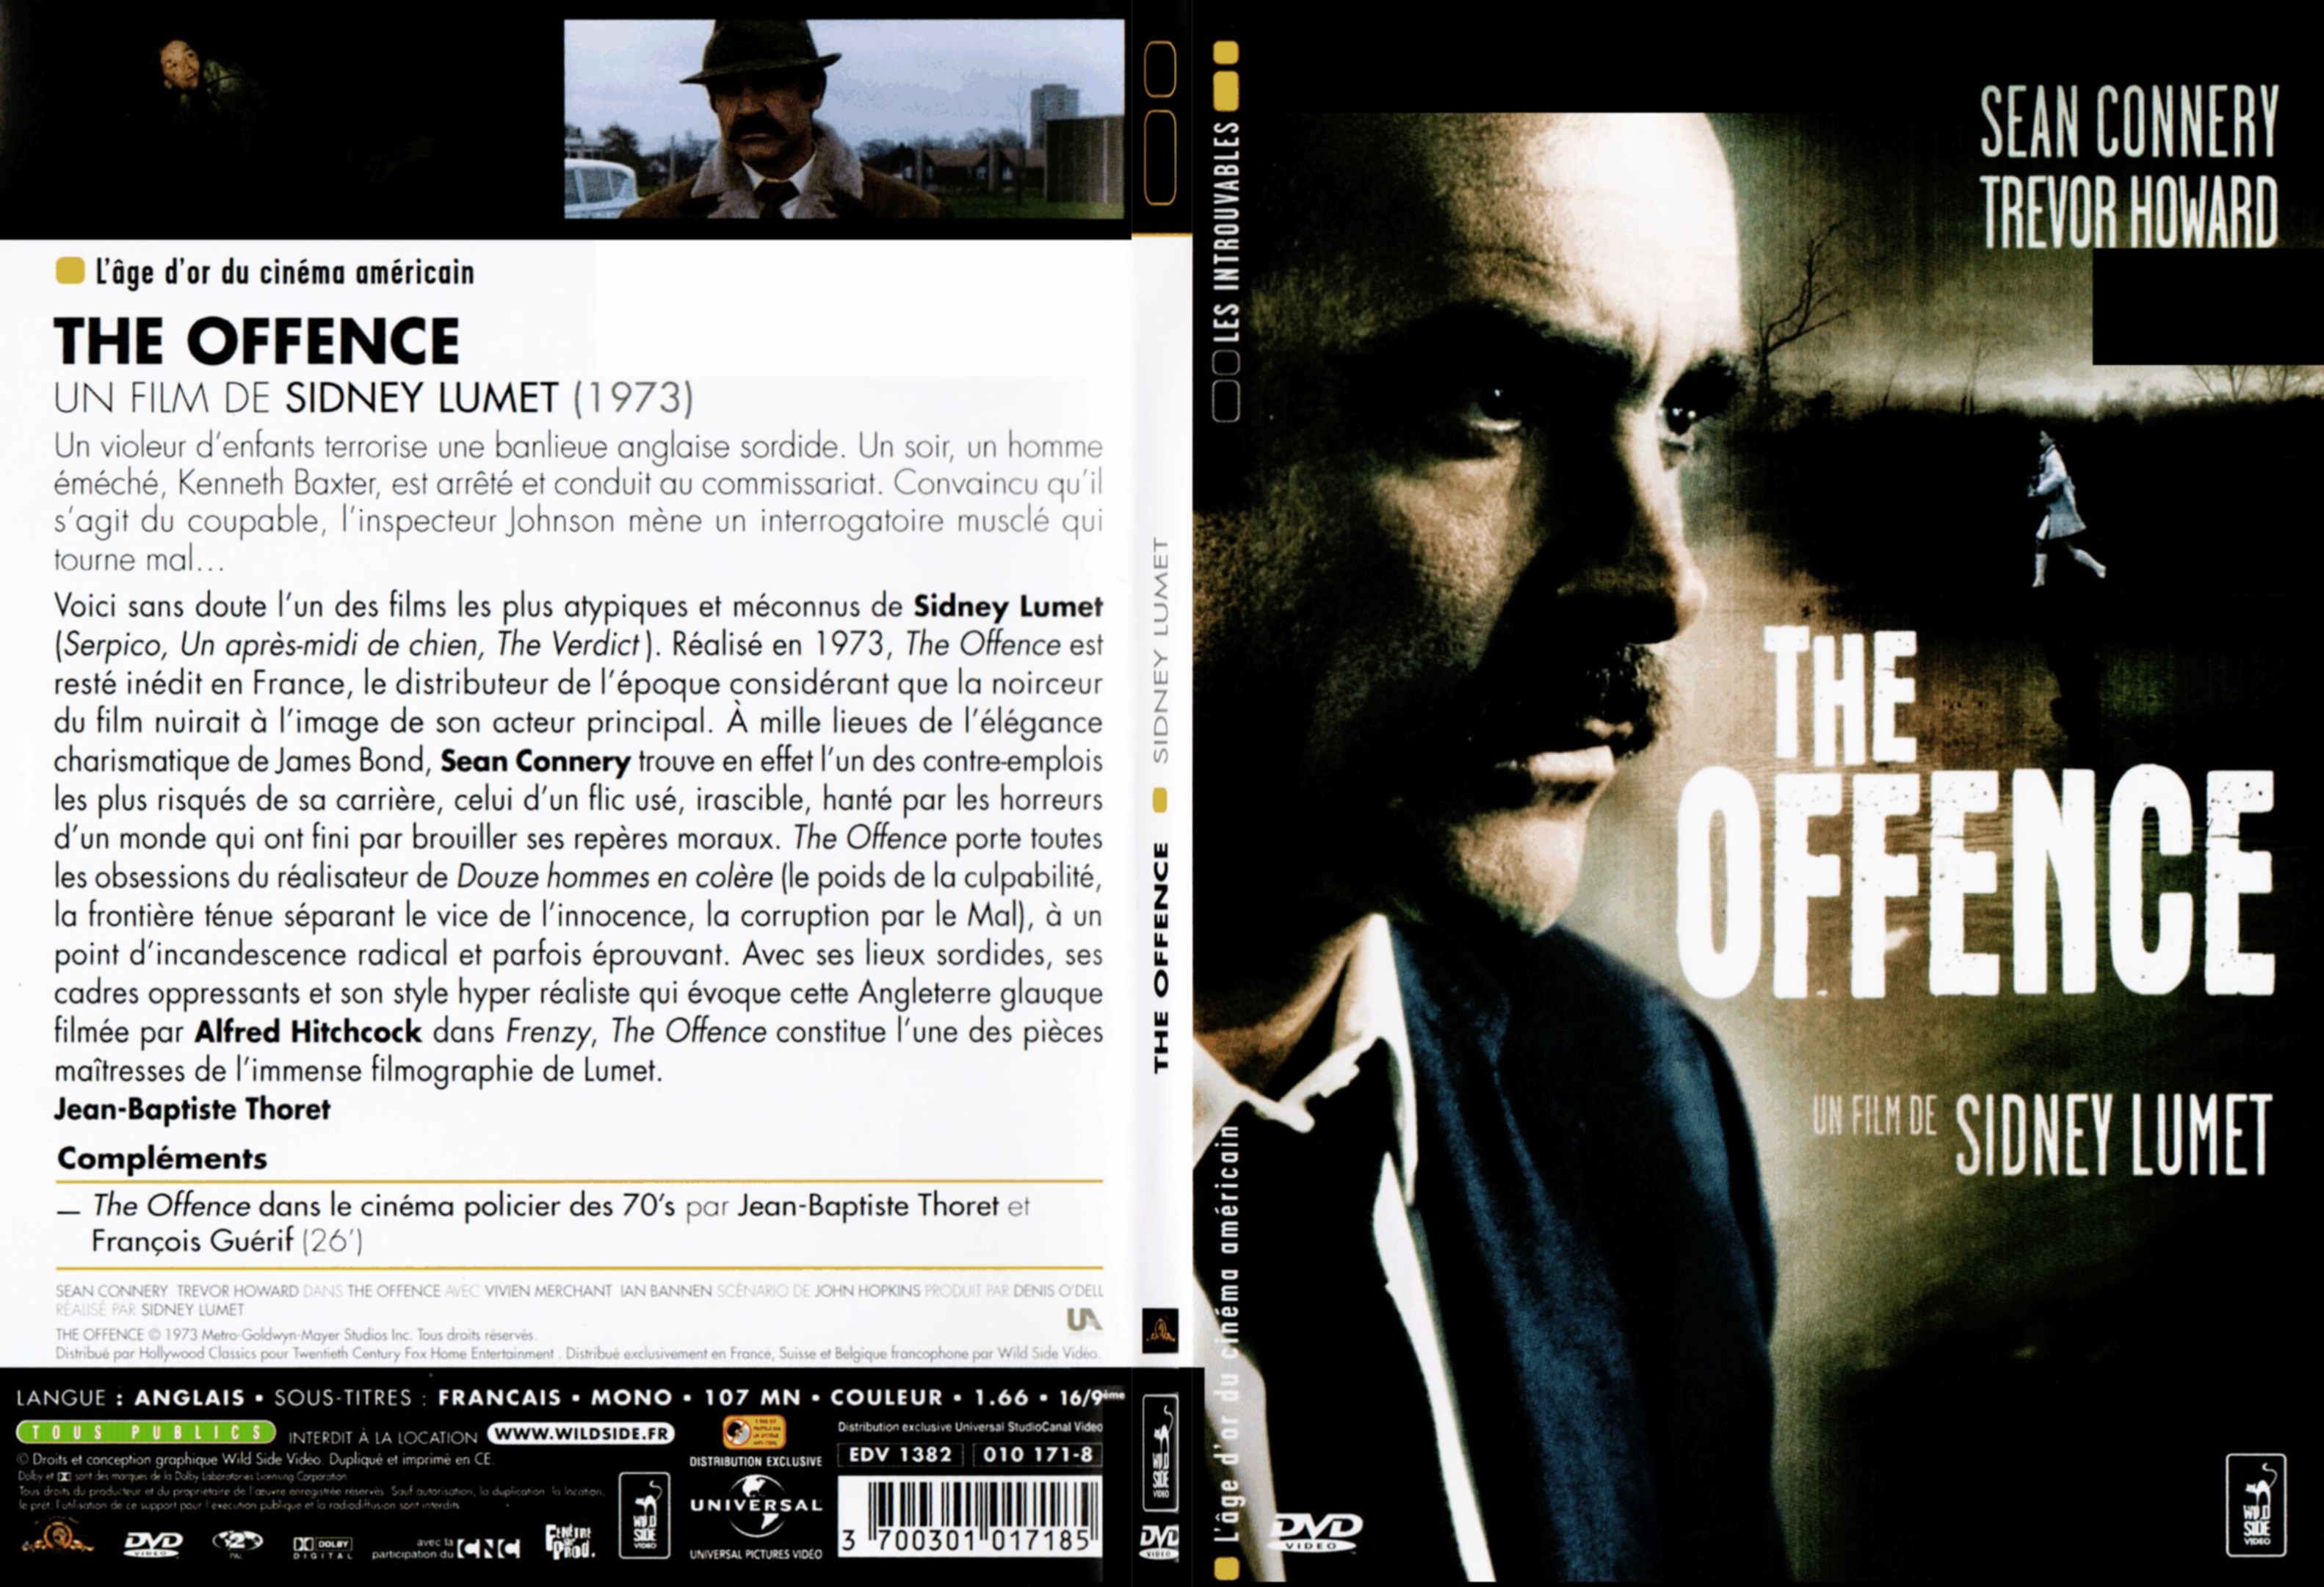 Jaquette DVD The offence - SLIM